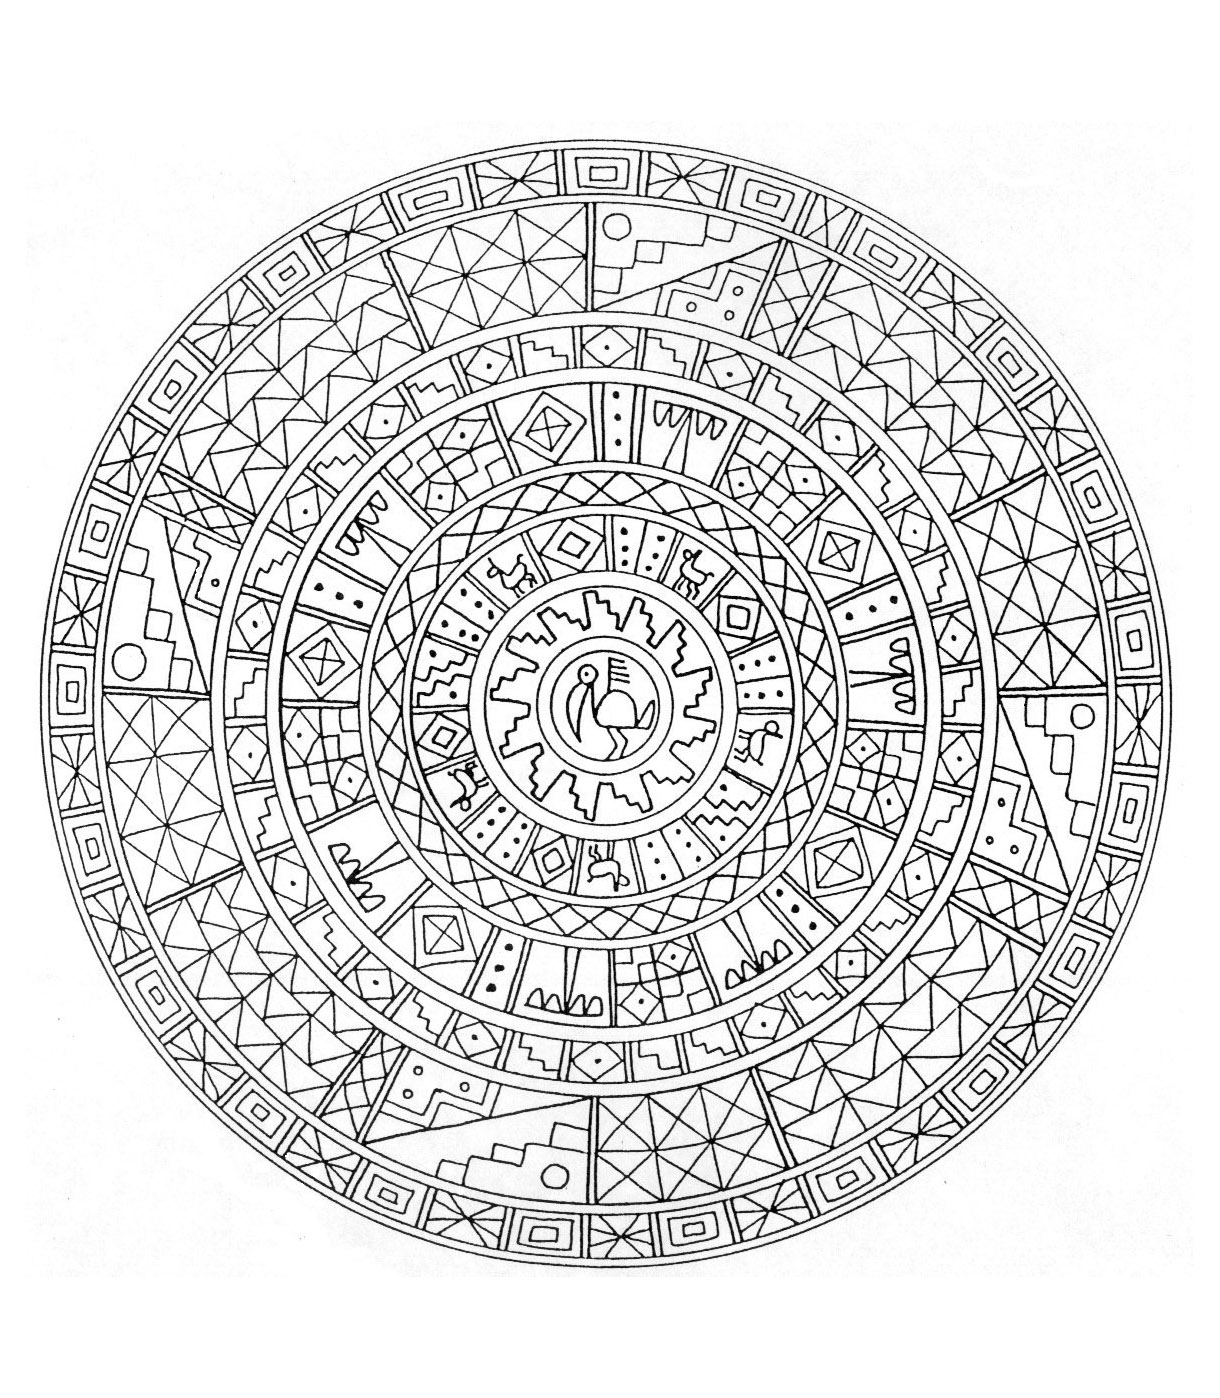 The Mandala has made us think about the Aztecs or Incas patterns, with all its very little details. A coloring page to print without delay